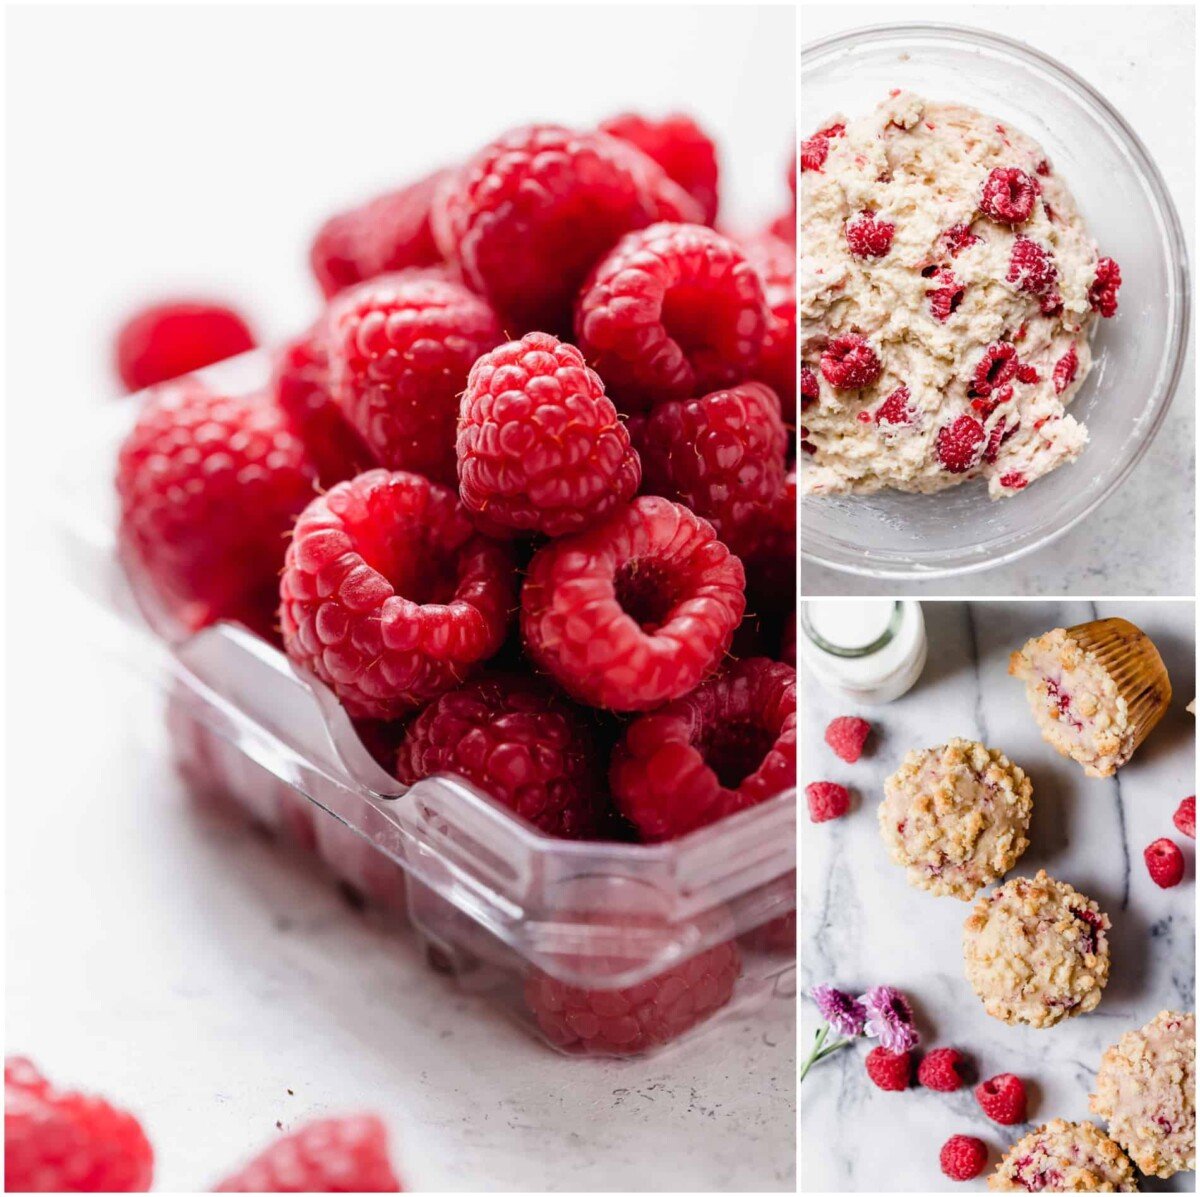 Raspberry Lemon Streusel Muffins that make your kitchen smell like a warm, sunny day. These are the perfect breakfast treat!